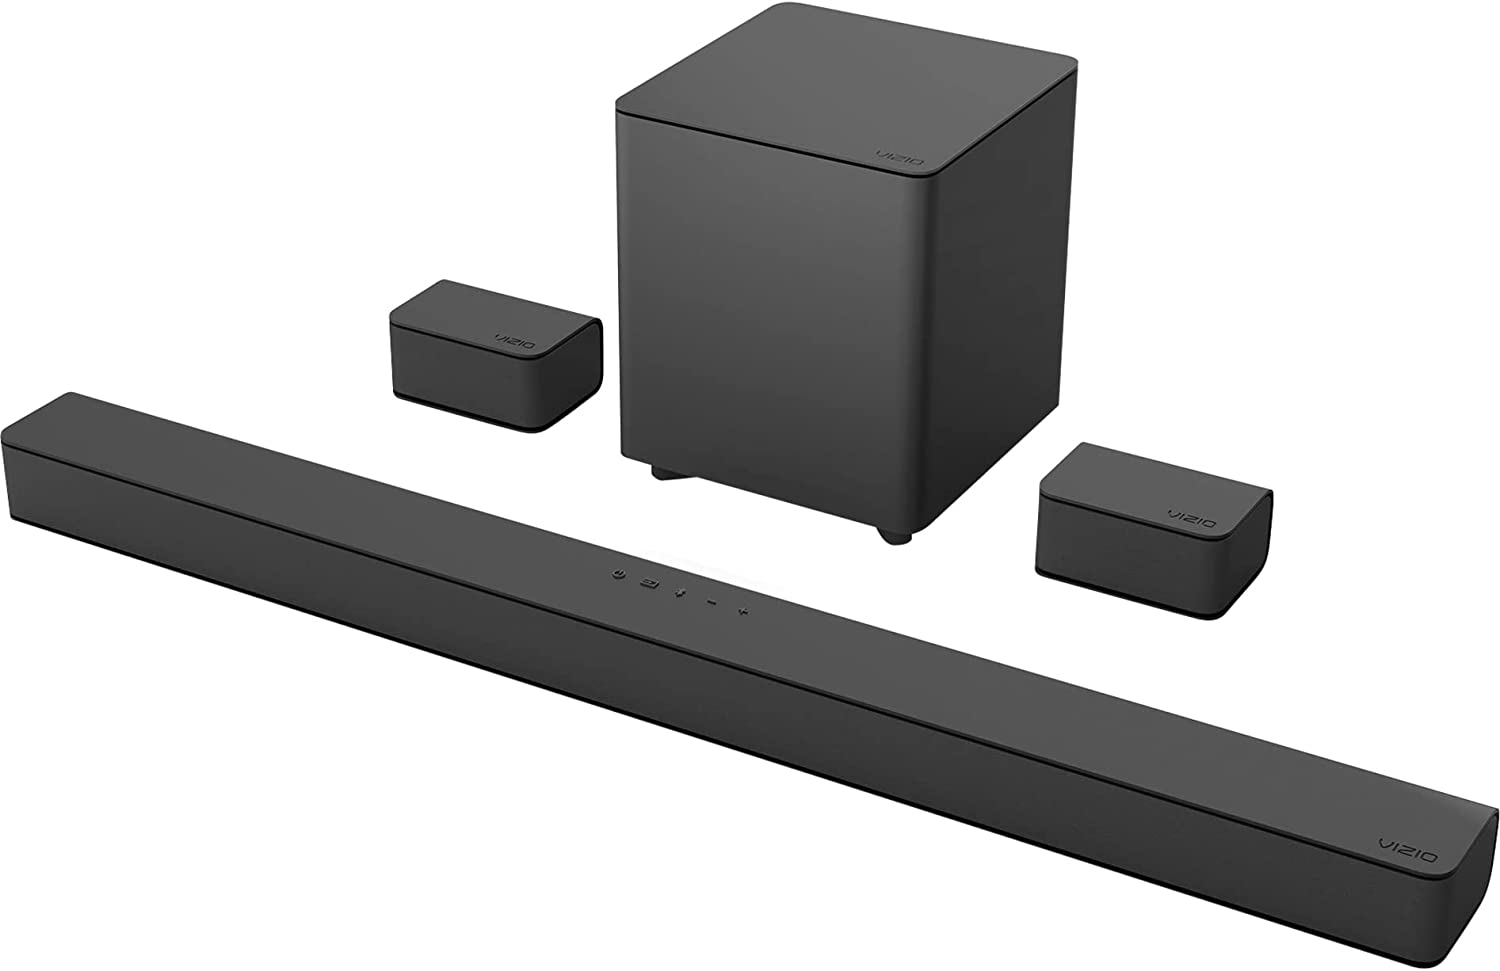 VIZIO V-Series 5.1 Home Theater Sound Bar with Dolby Audio, Bluetooth, Wireless Subwoofer, Voice Assistant Compatible, Includes Remote Command - V51x-J6